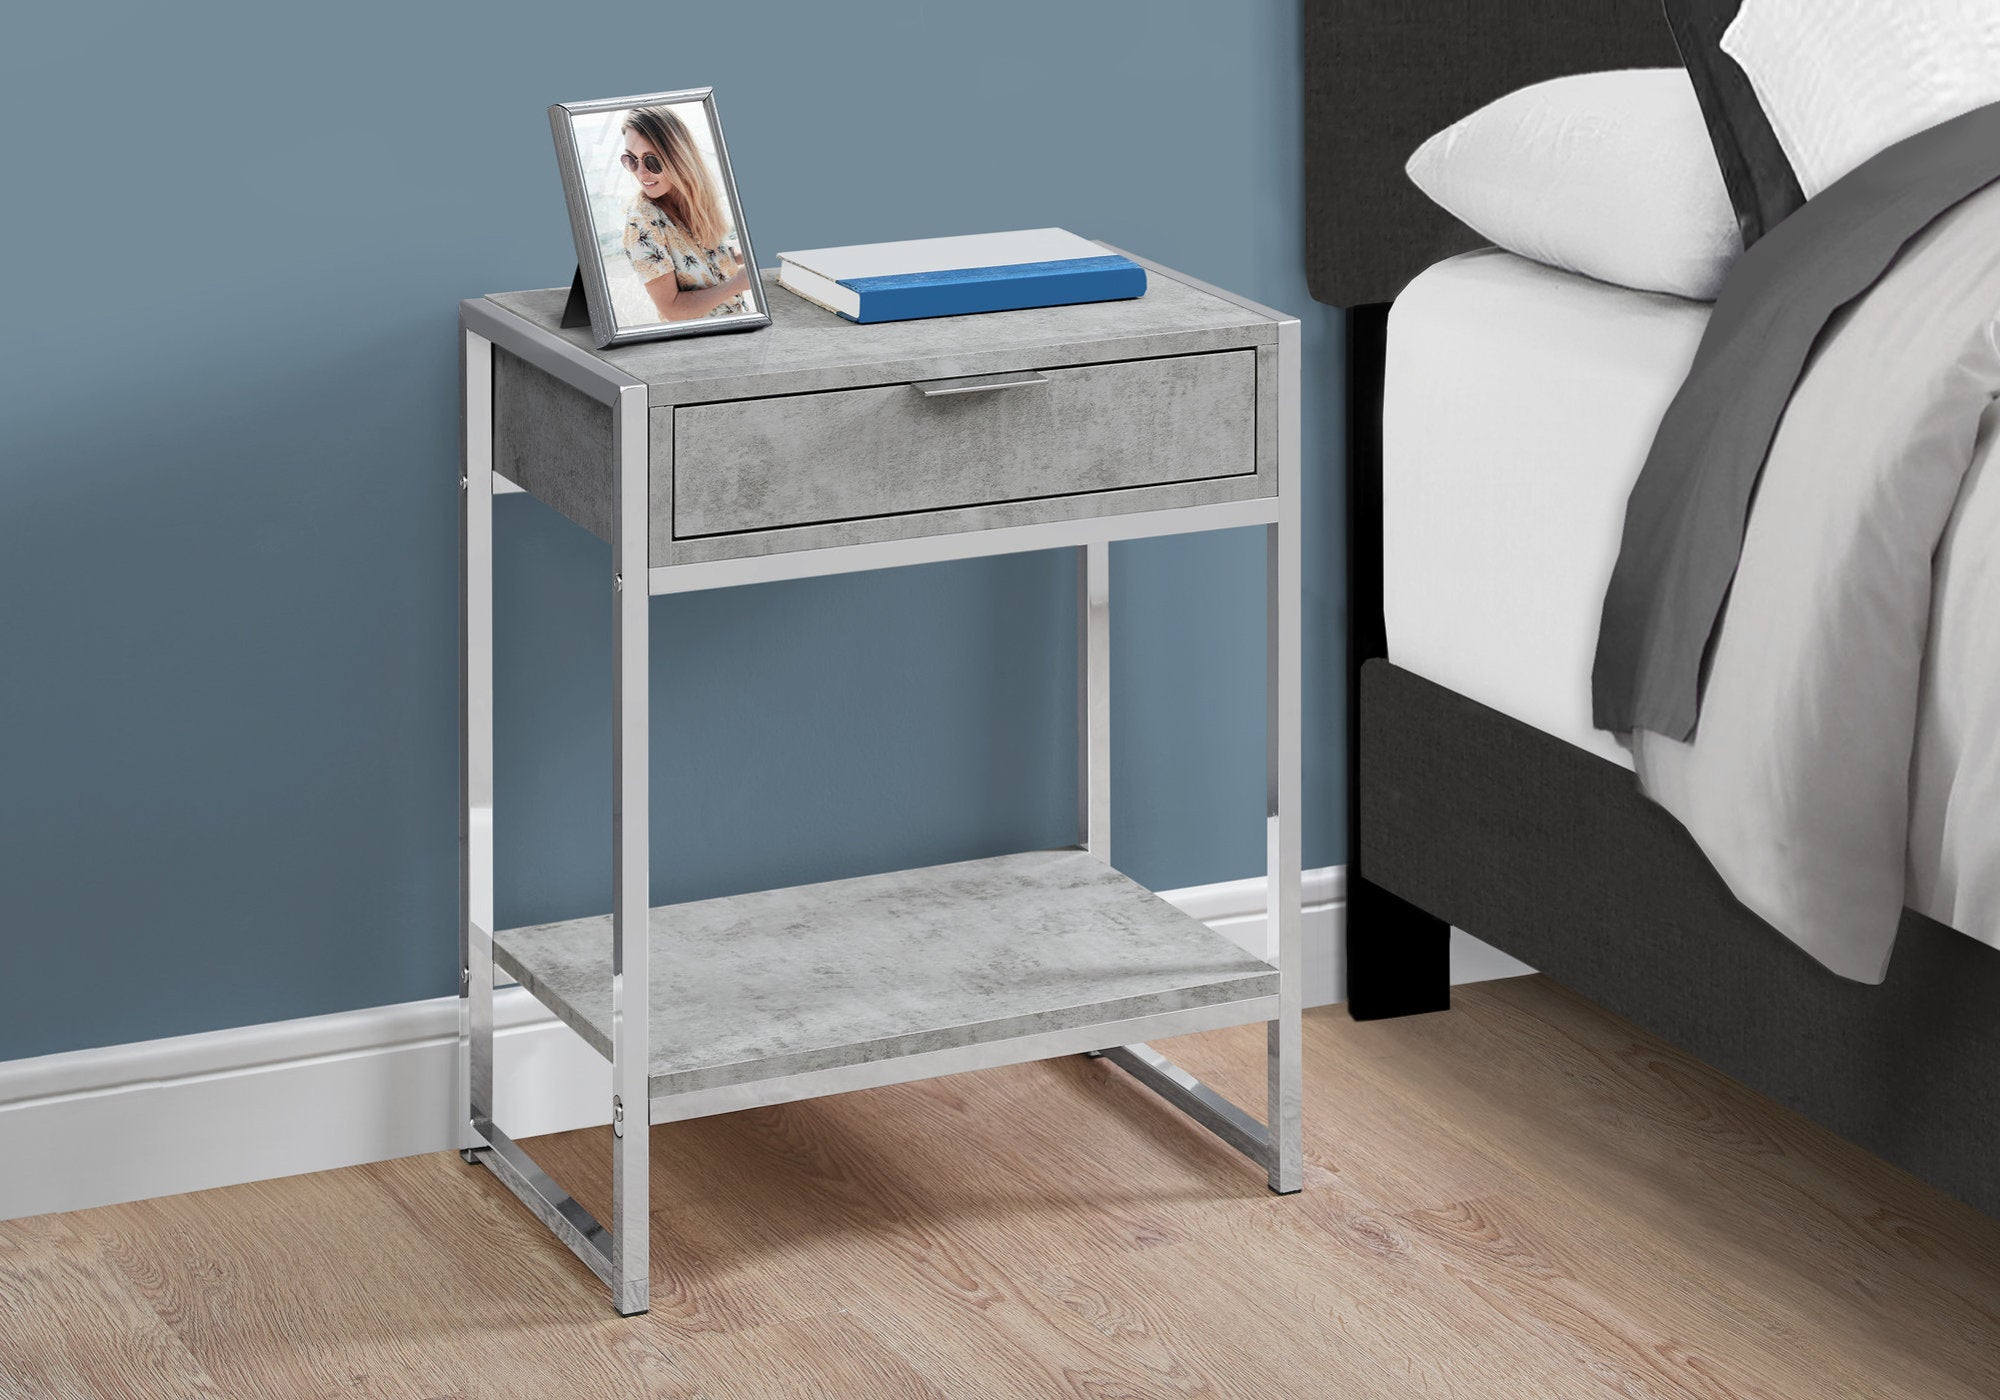 Accent Table - 24H / Grey Cement / Chrome Metal